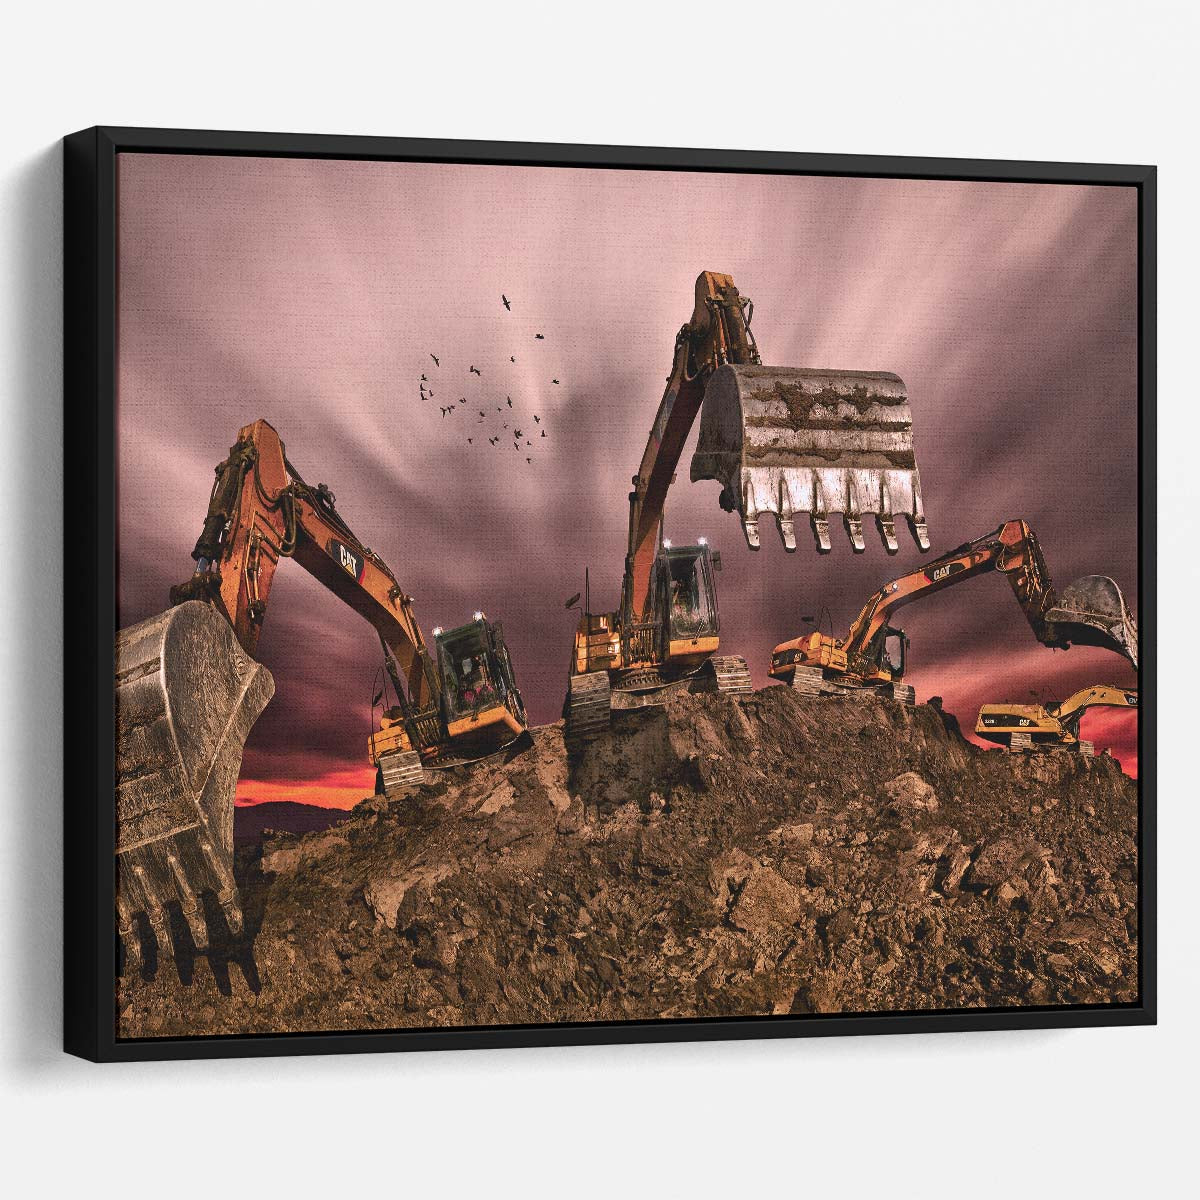 Dramatic Excavator Digging at Dusk Construction Wall Art by Luxuriance Designs. Made in USA.